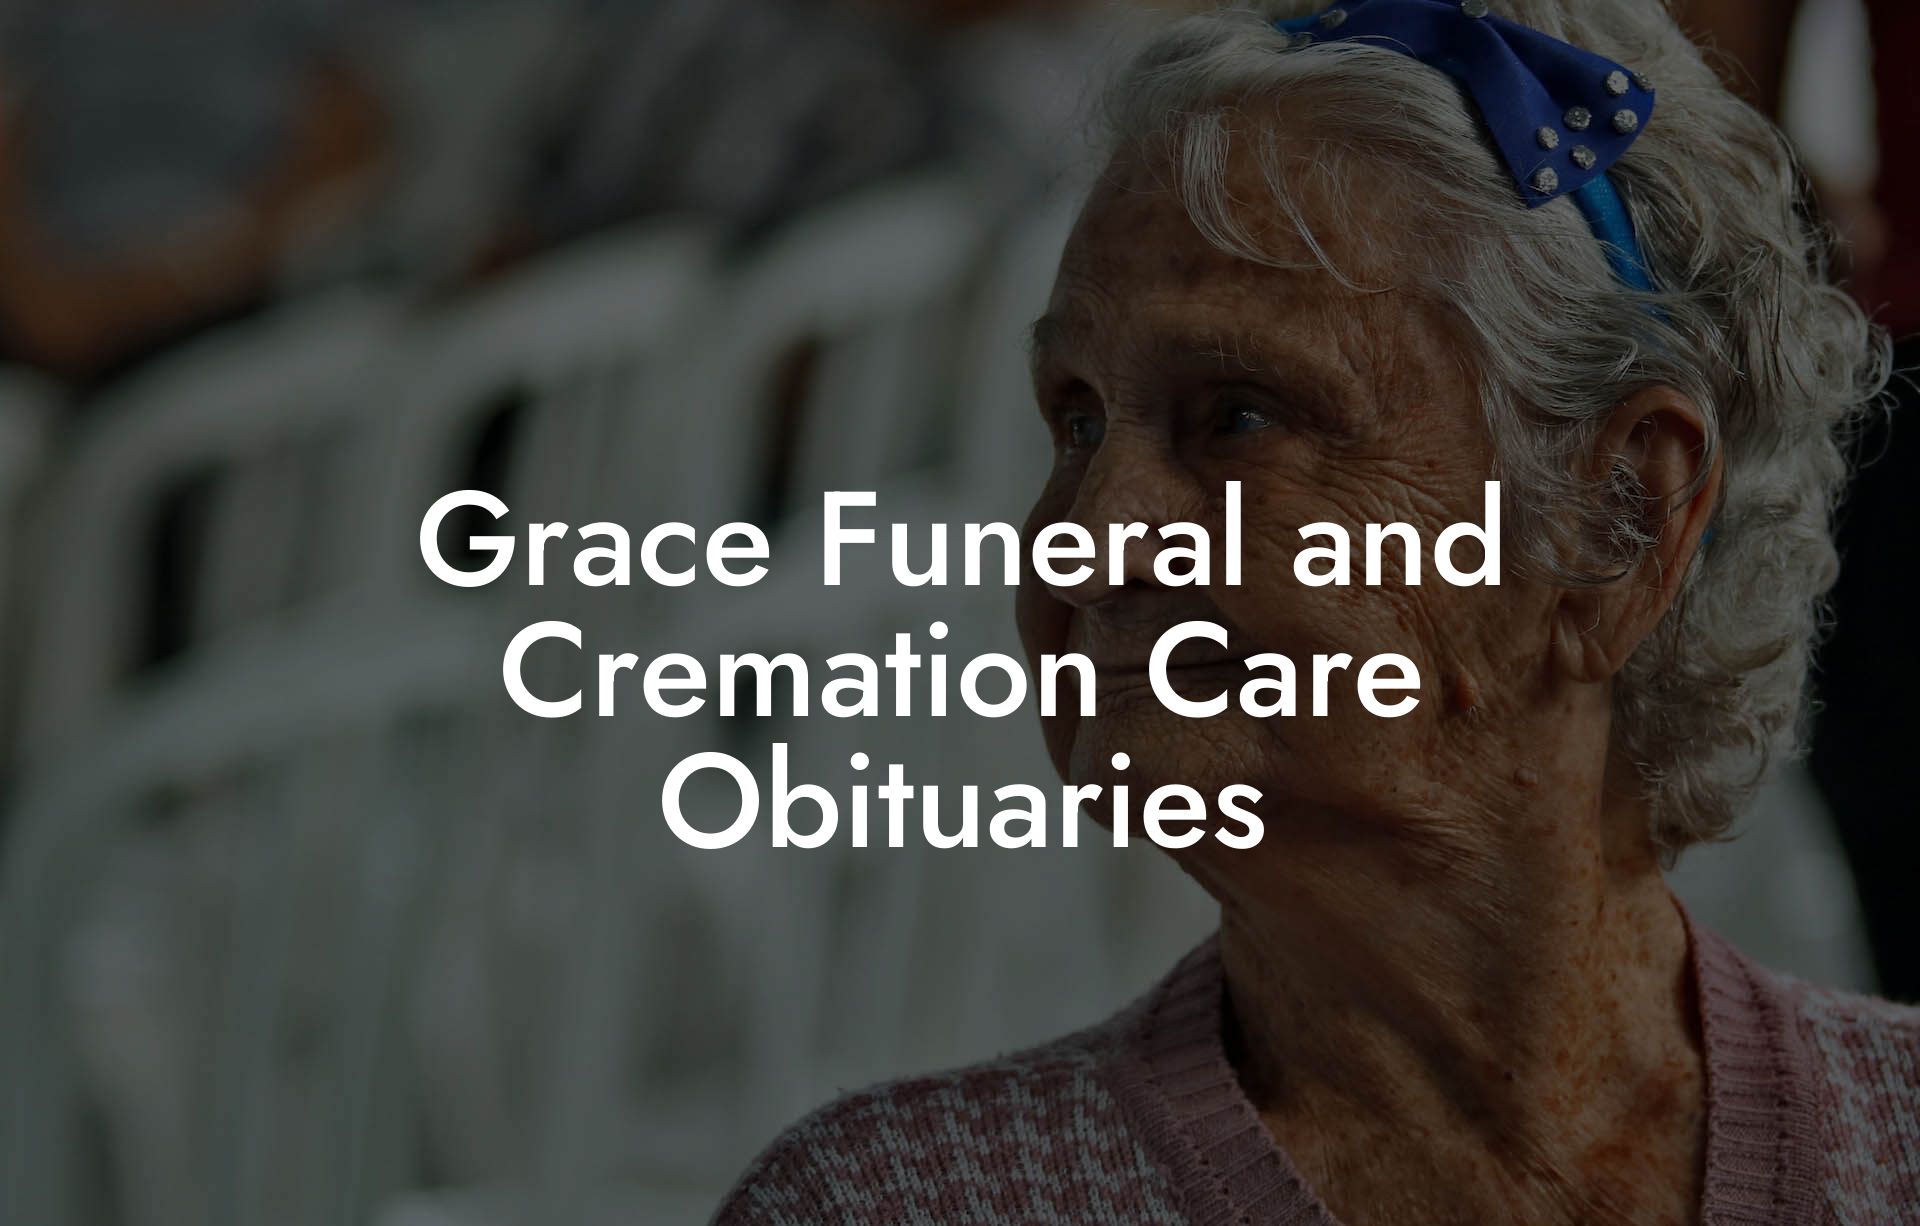 Grace Funeral and Cremation Care Obituaries